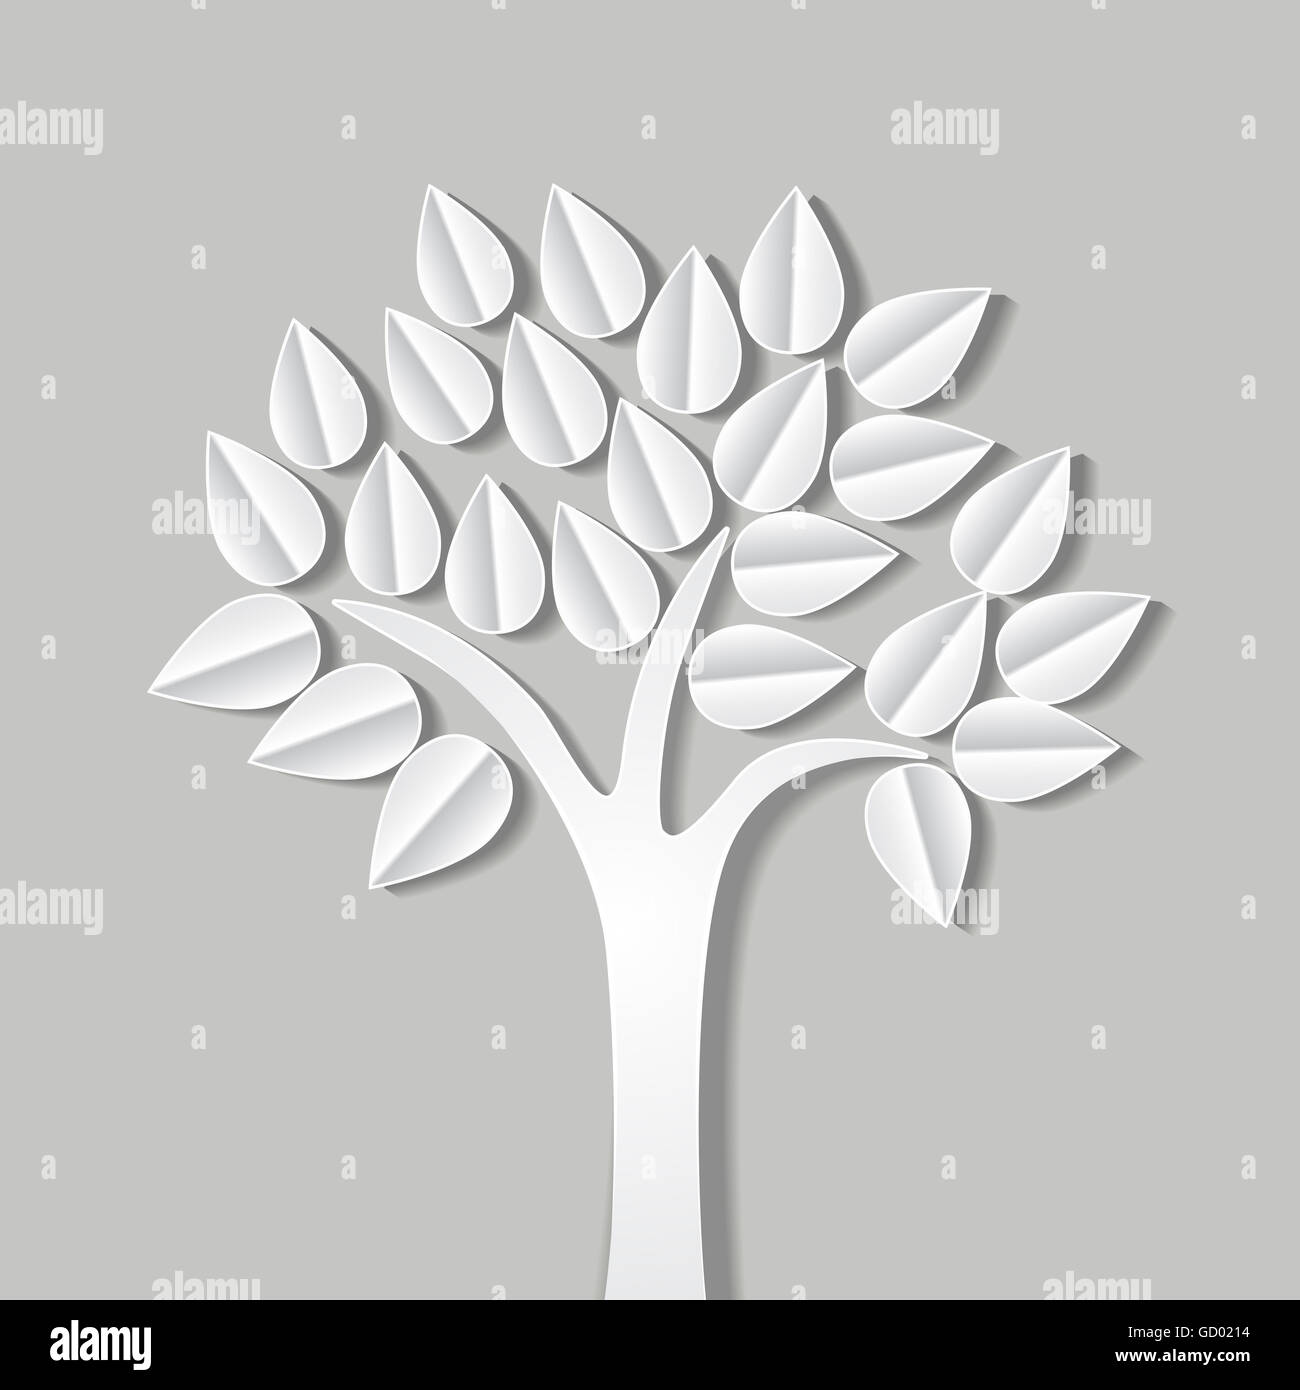 abstract illustration with tree made of paper with shadow Stock Photo